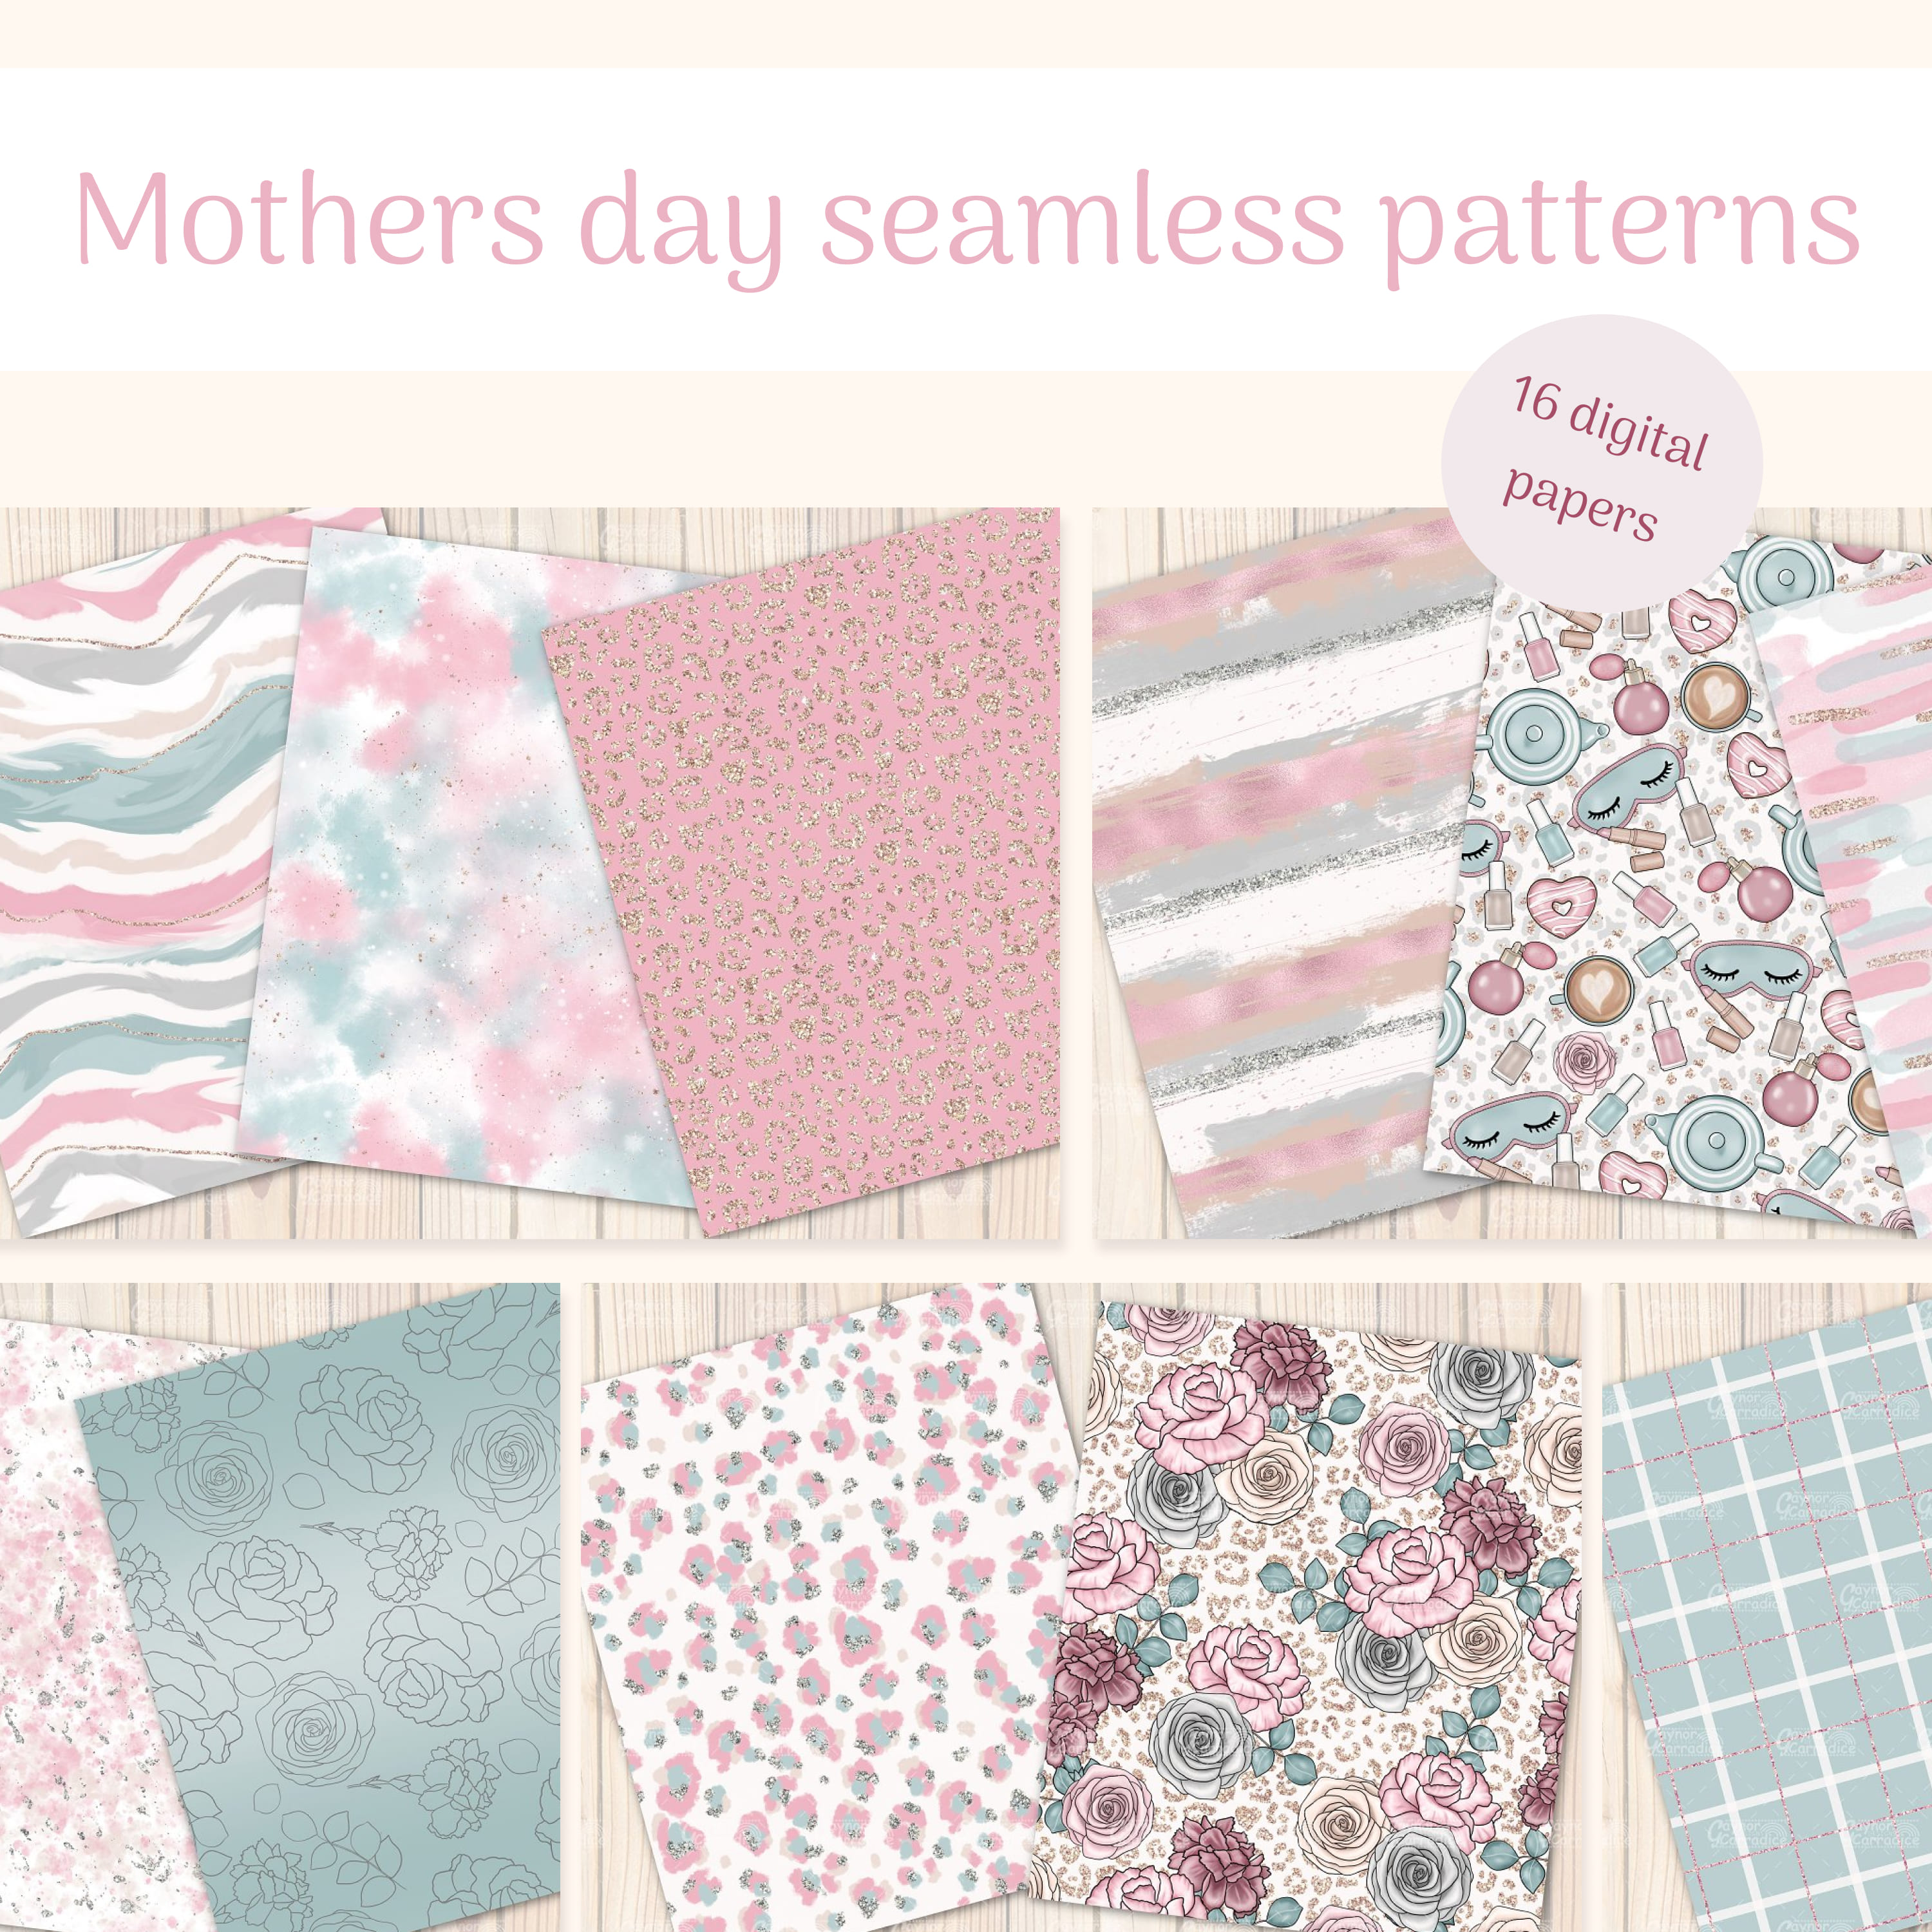 Mothers day seamless patterns cover.